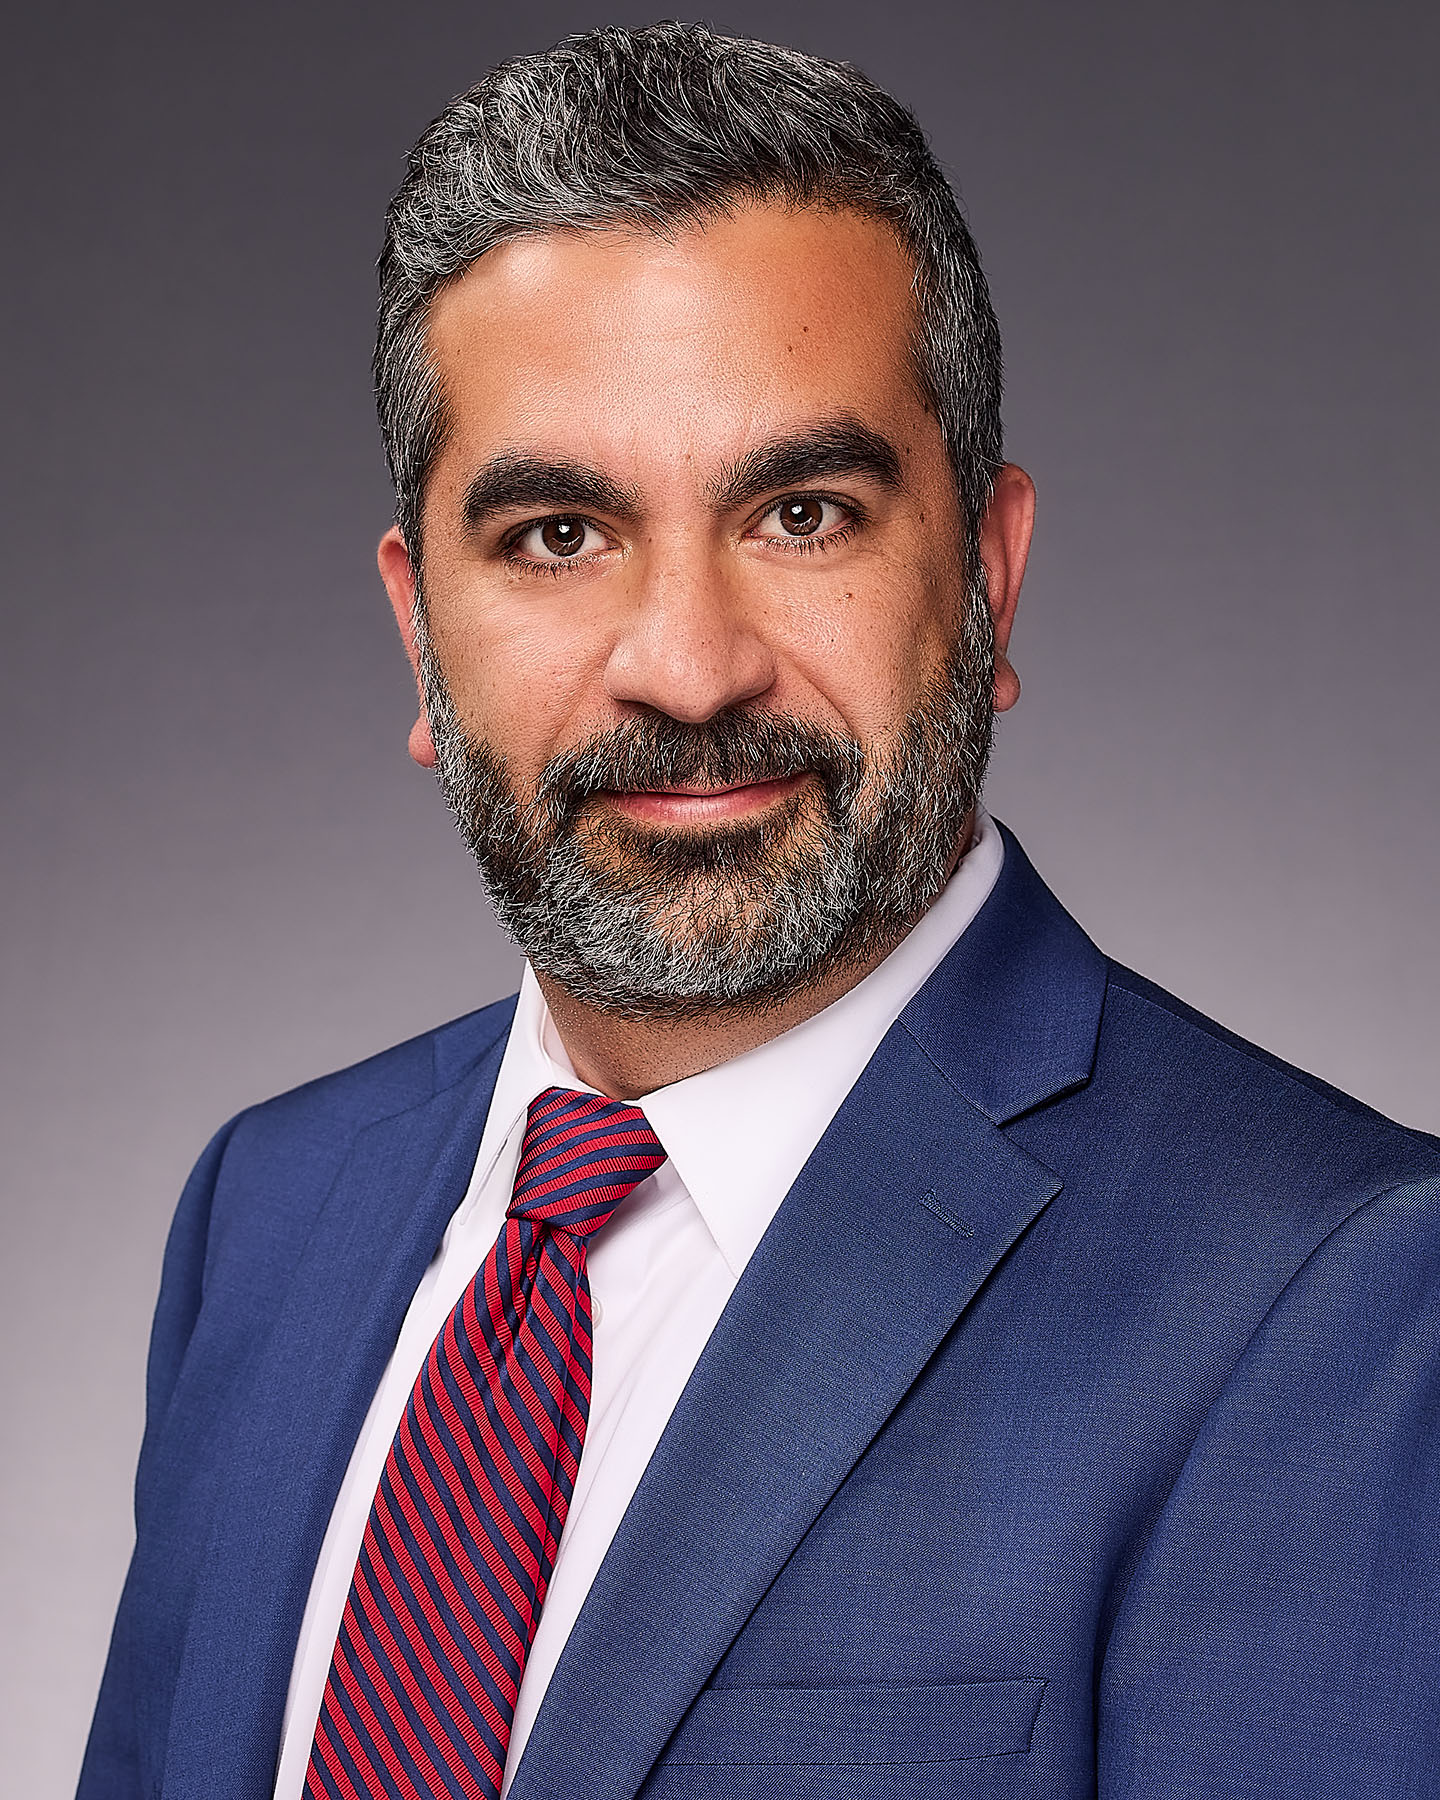 A lawyer in an executive headshot in Los Angeles made by The Light Committee